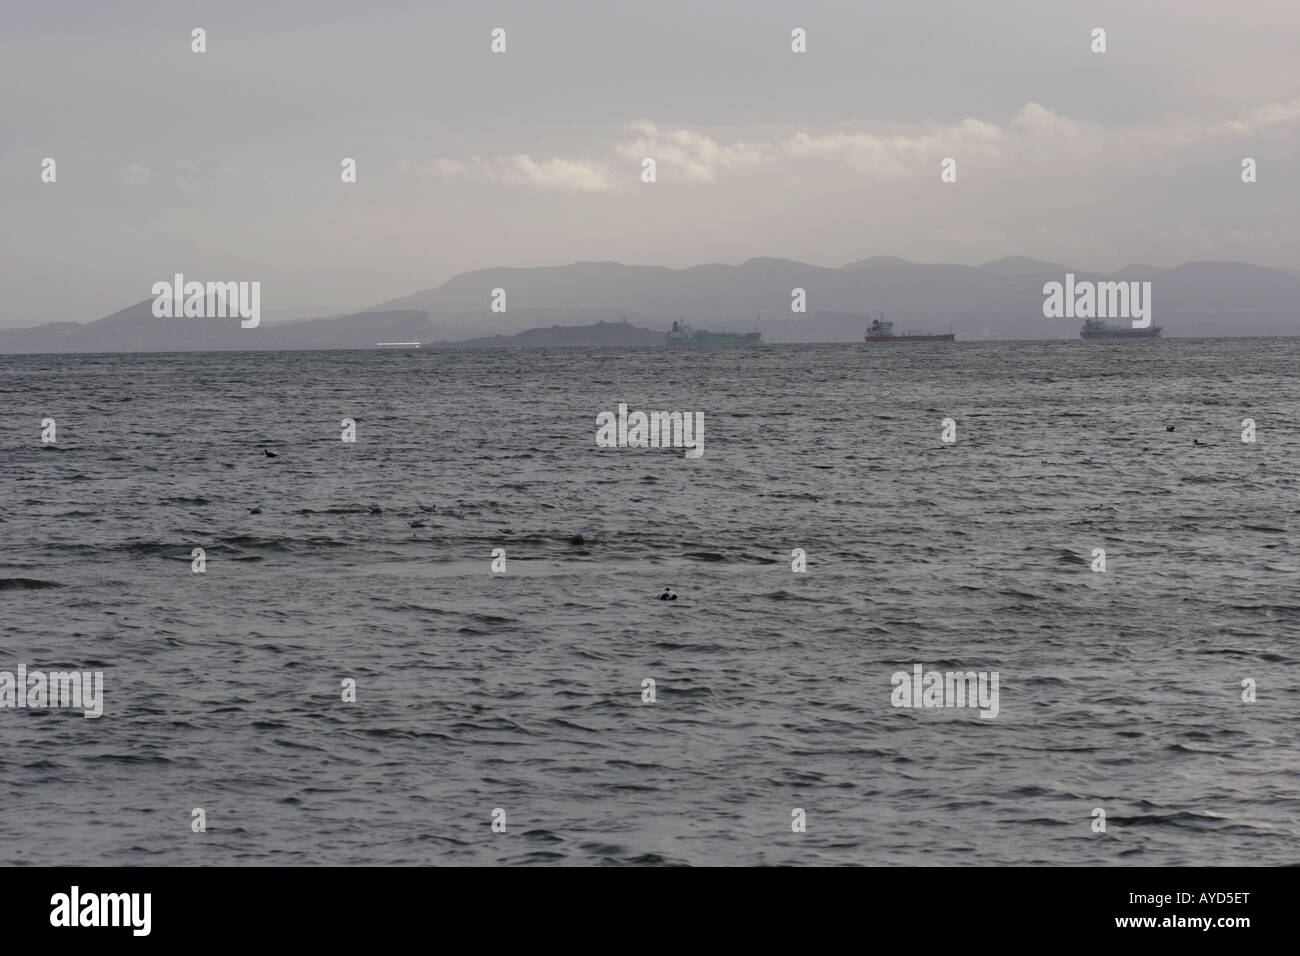 Looking from Fife across the Firth of Forth to ships off Inchkeith Island and Leith, Edinburgh and the Lammermuirs beyond. Stock Photo